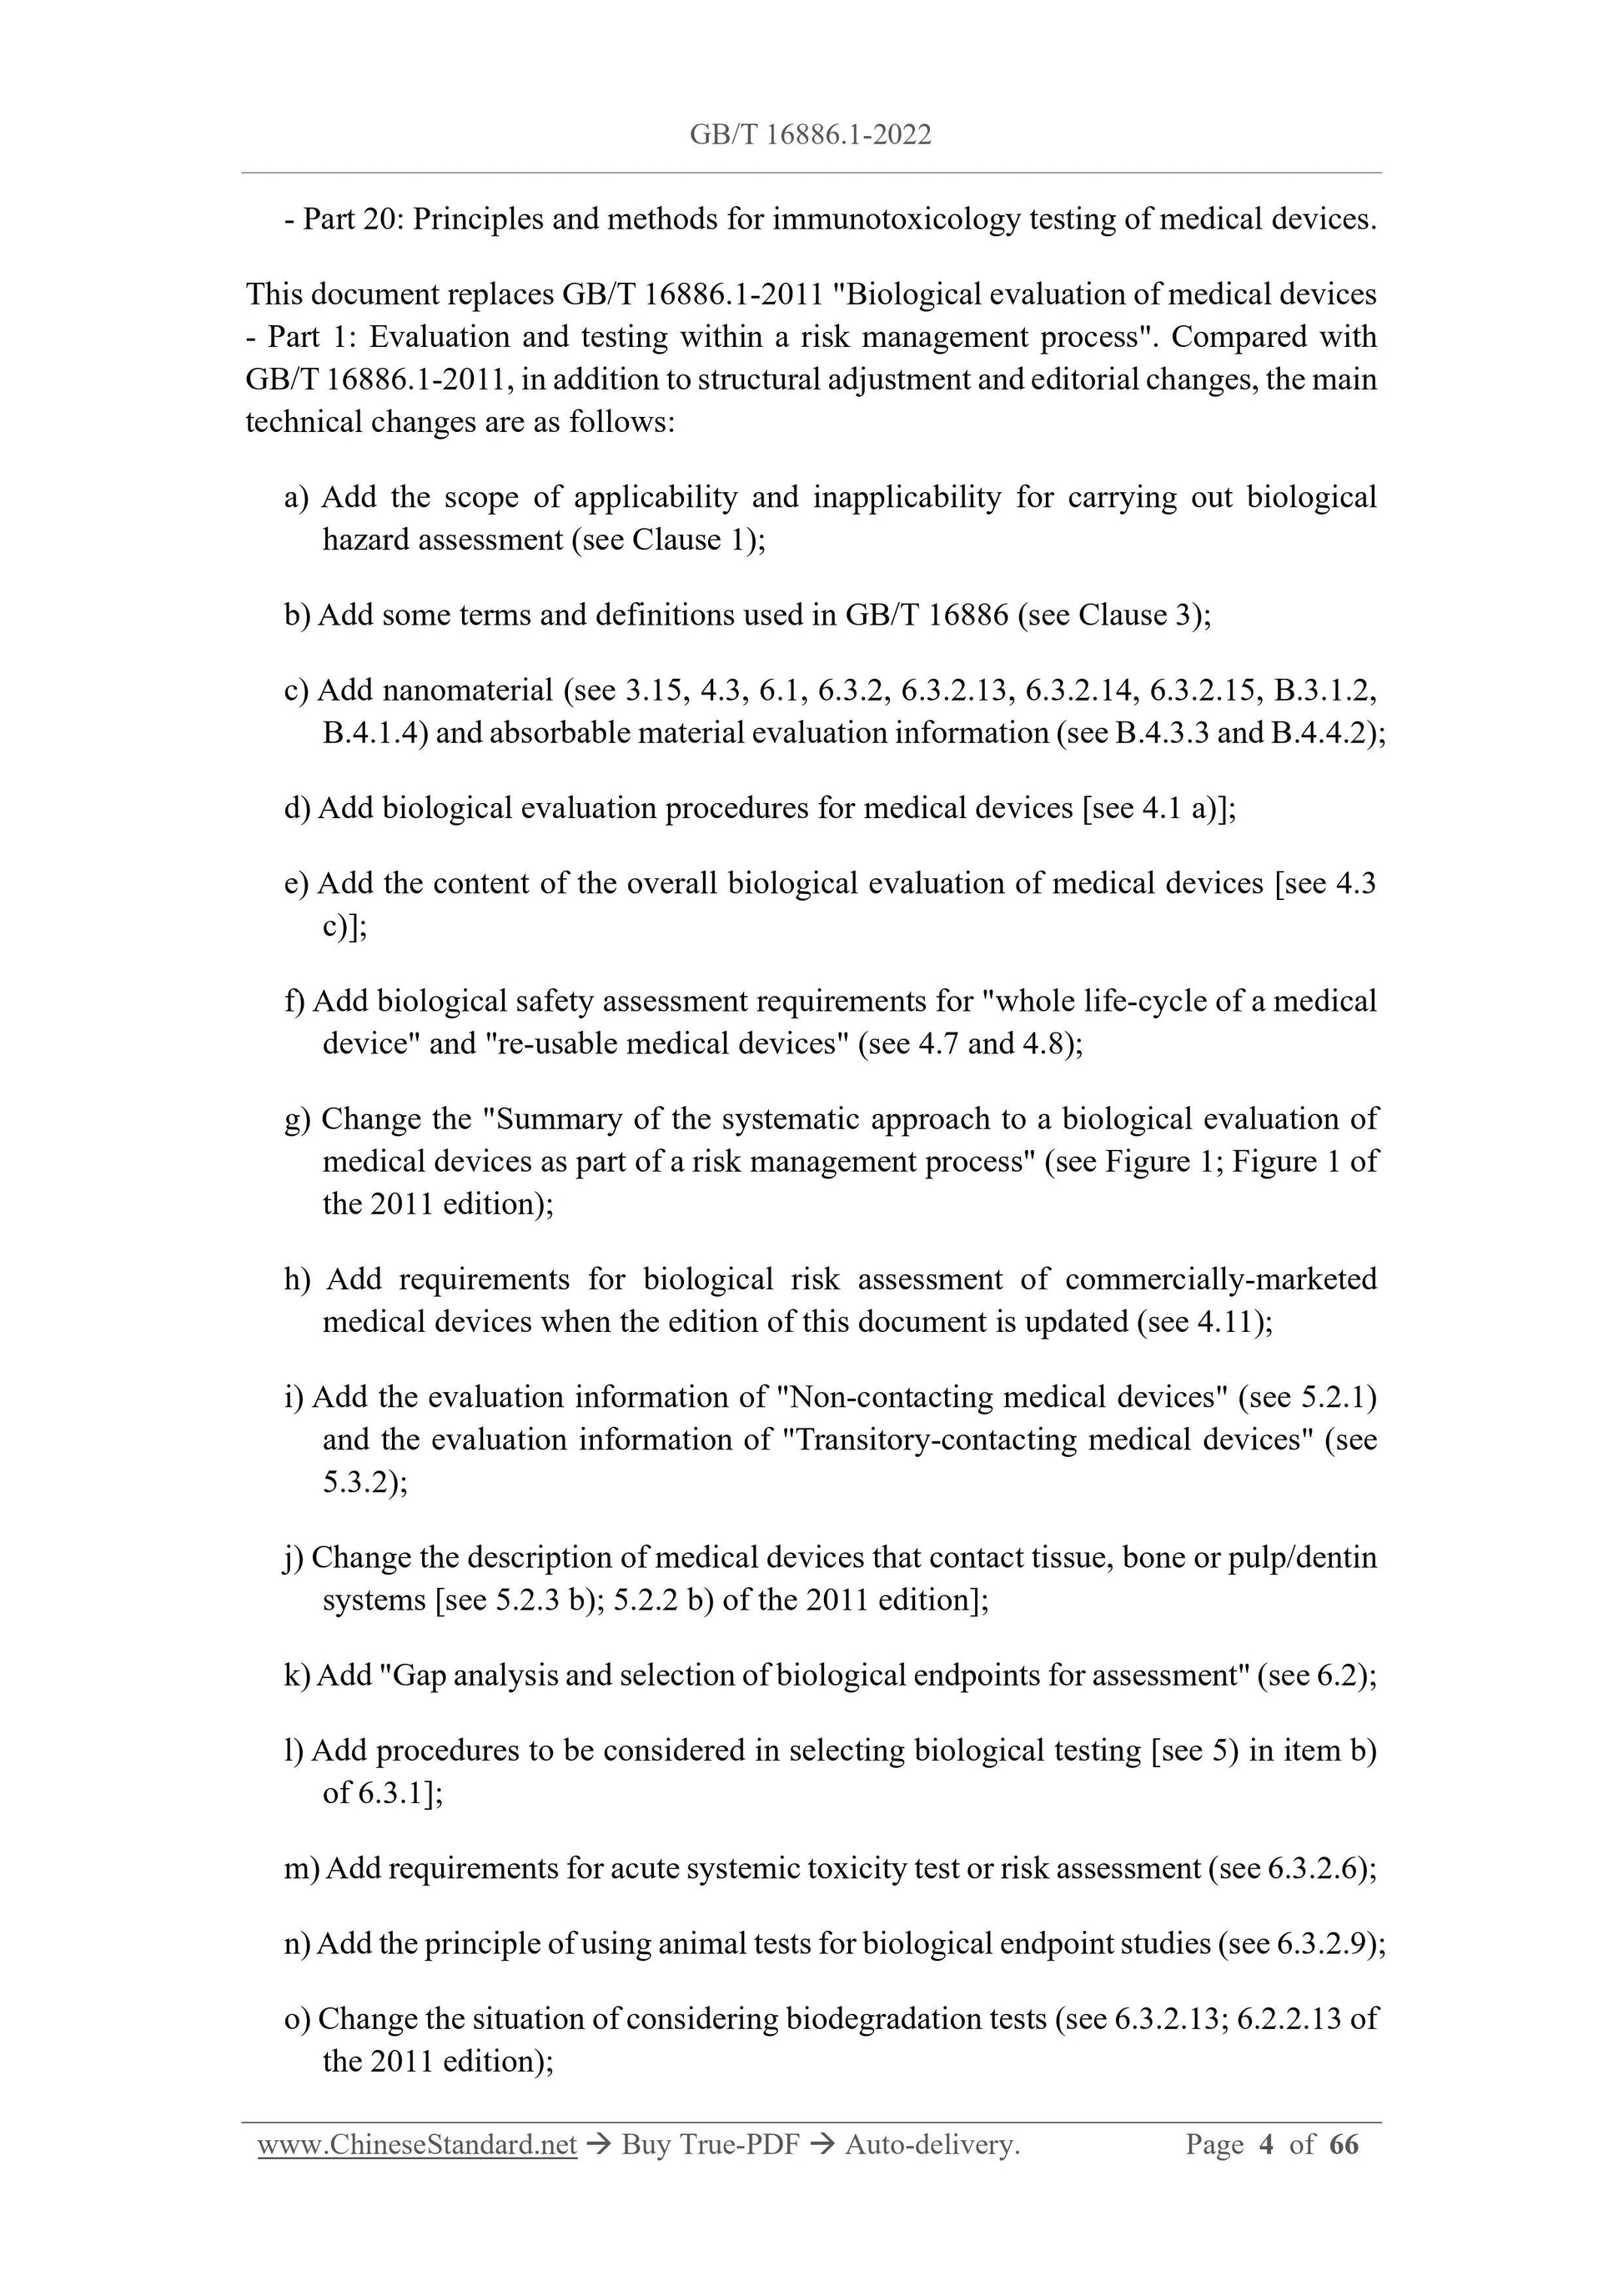 GB/T 16886.1-2022 Page 4